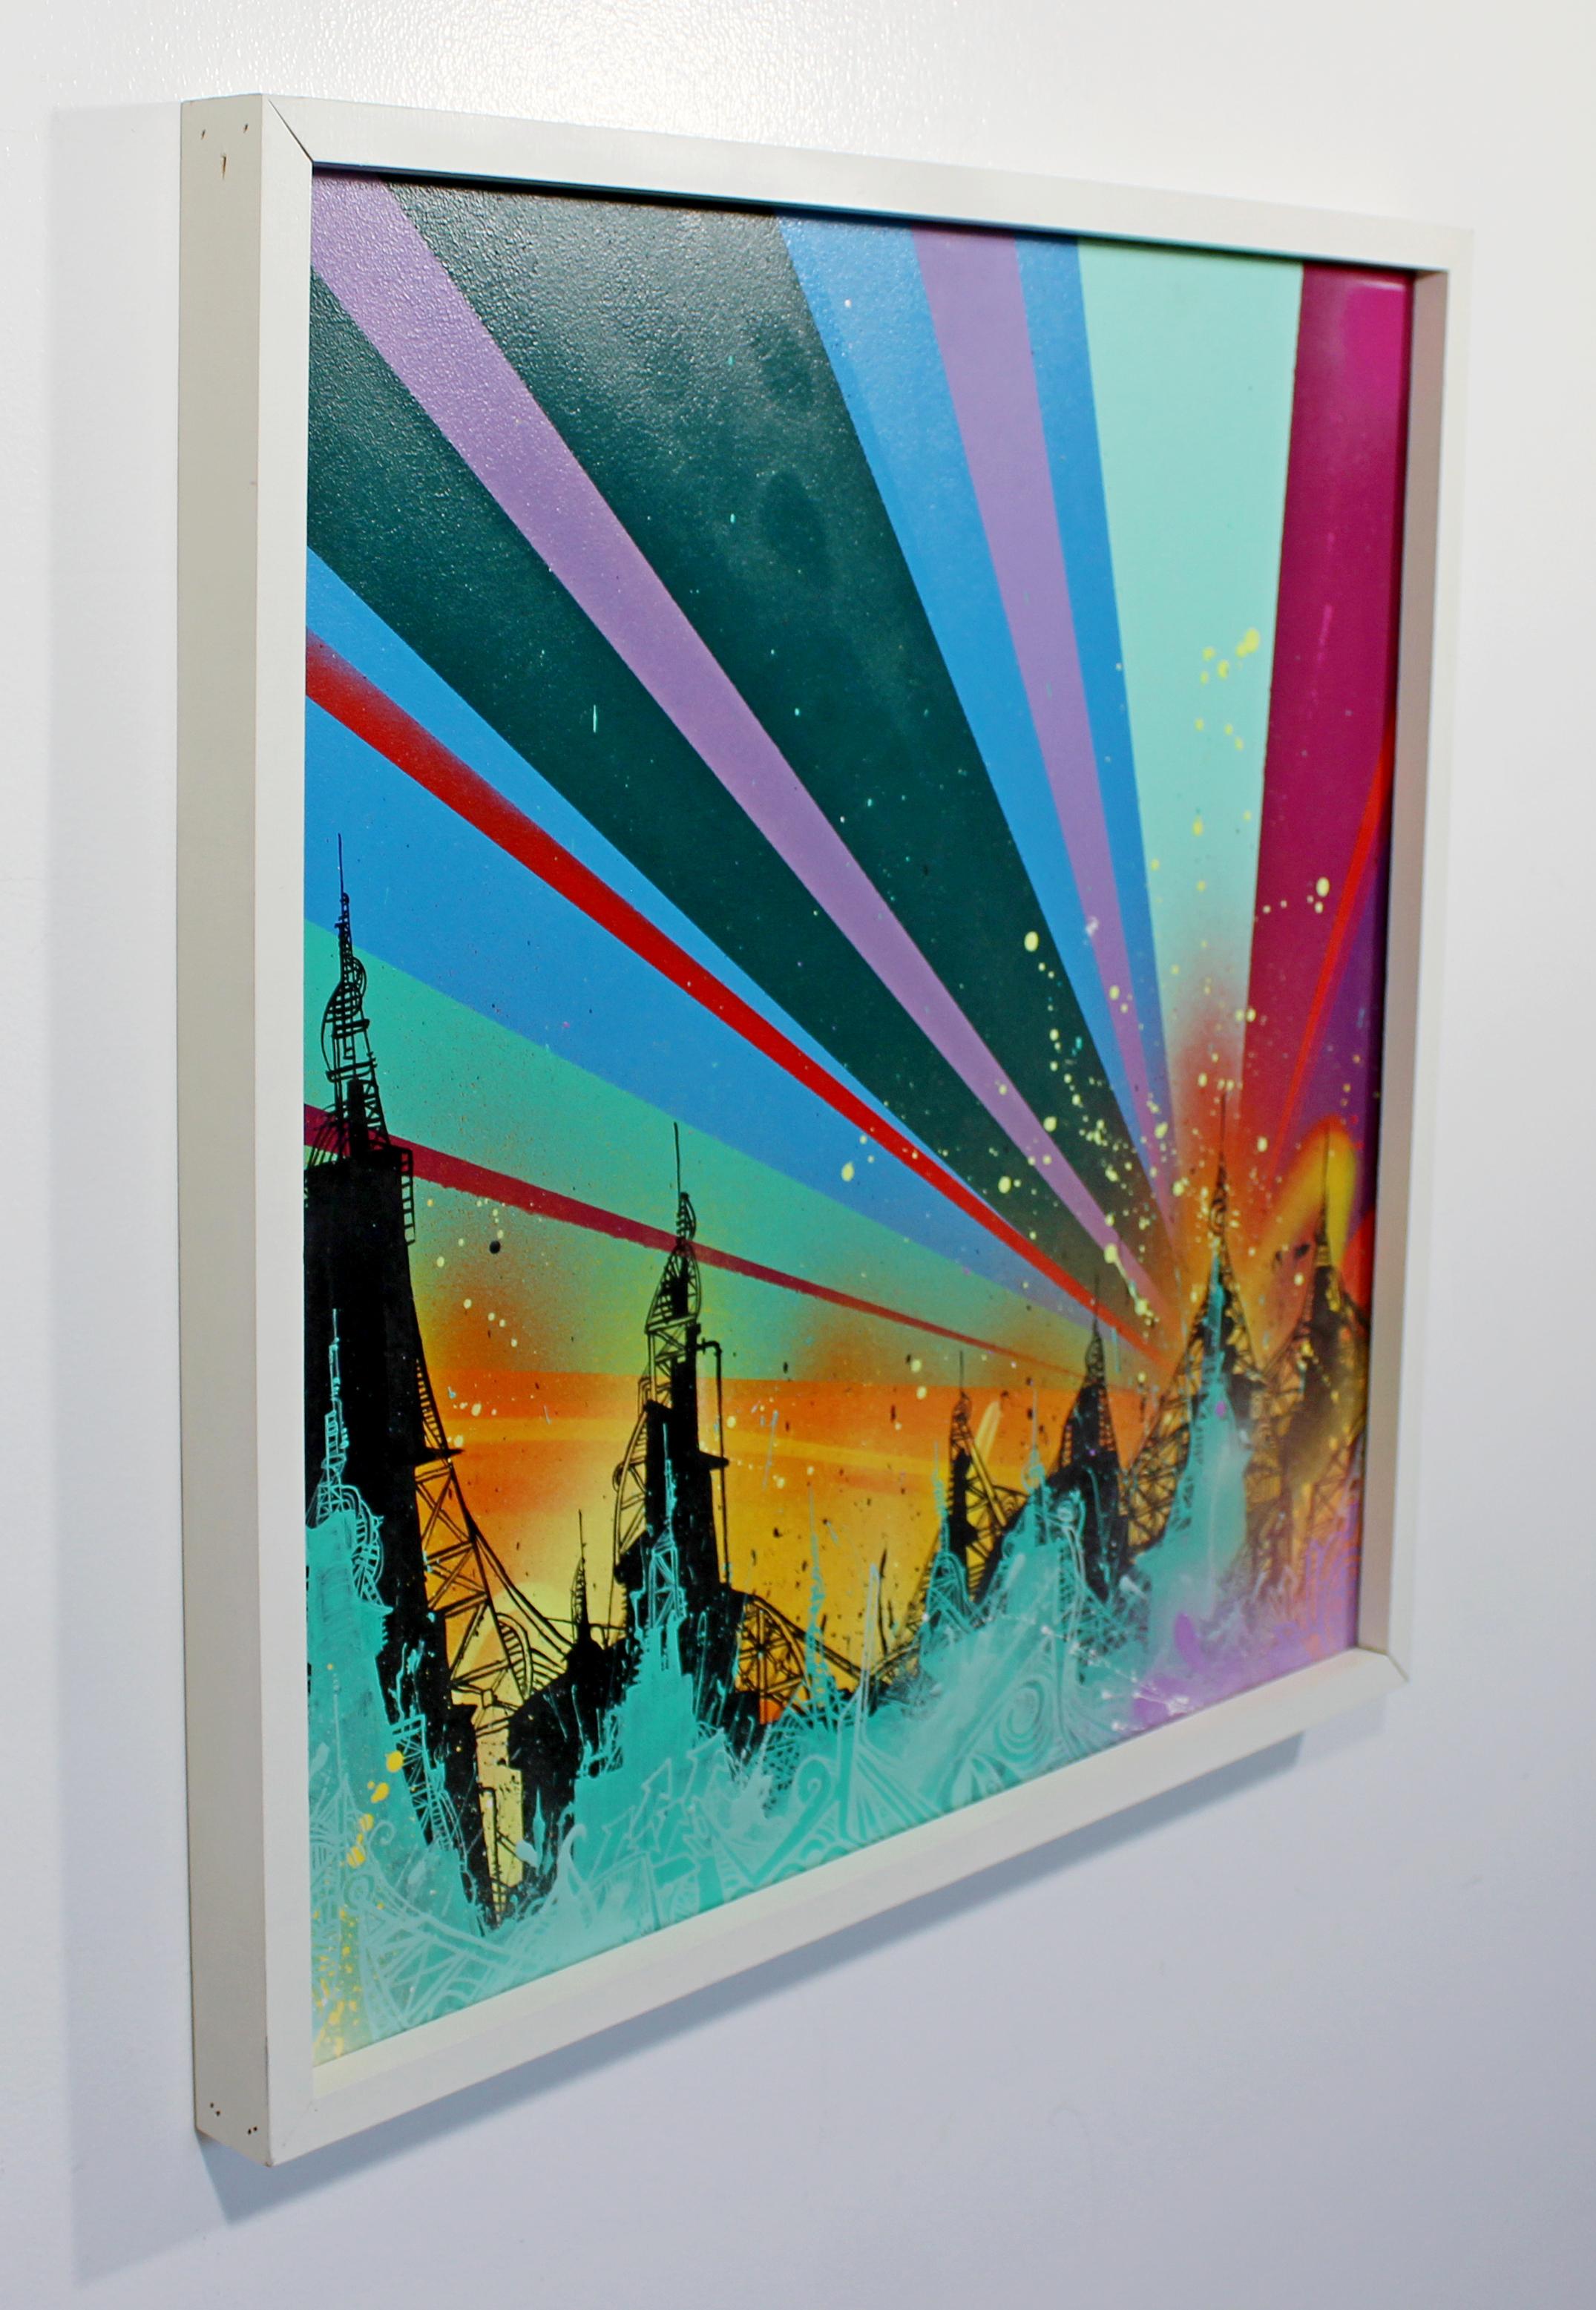 For your consideration is an exciting, framed, acrylic and spray paint on wood painting, 